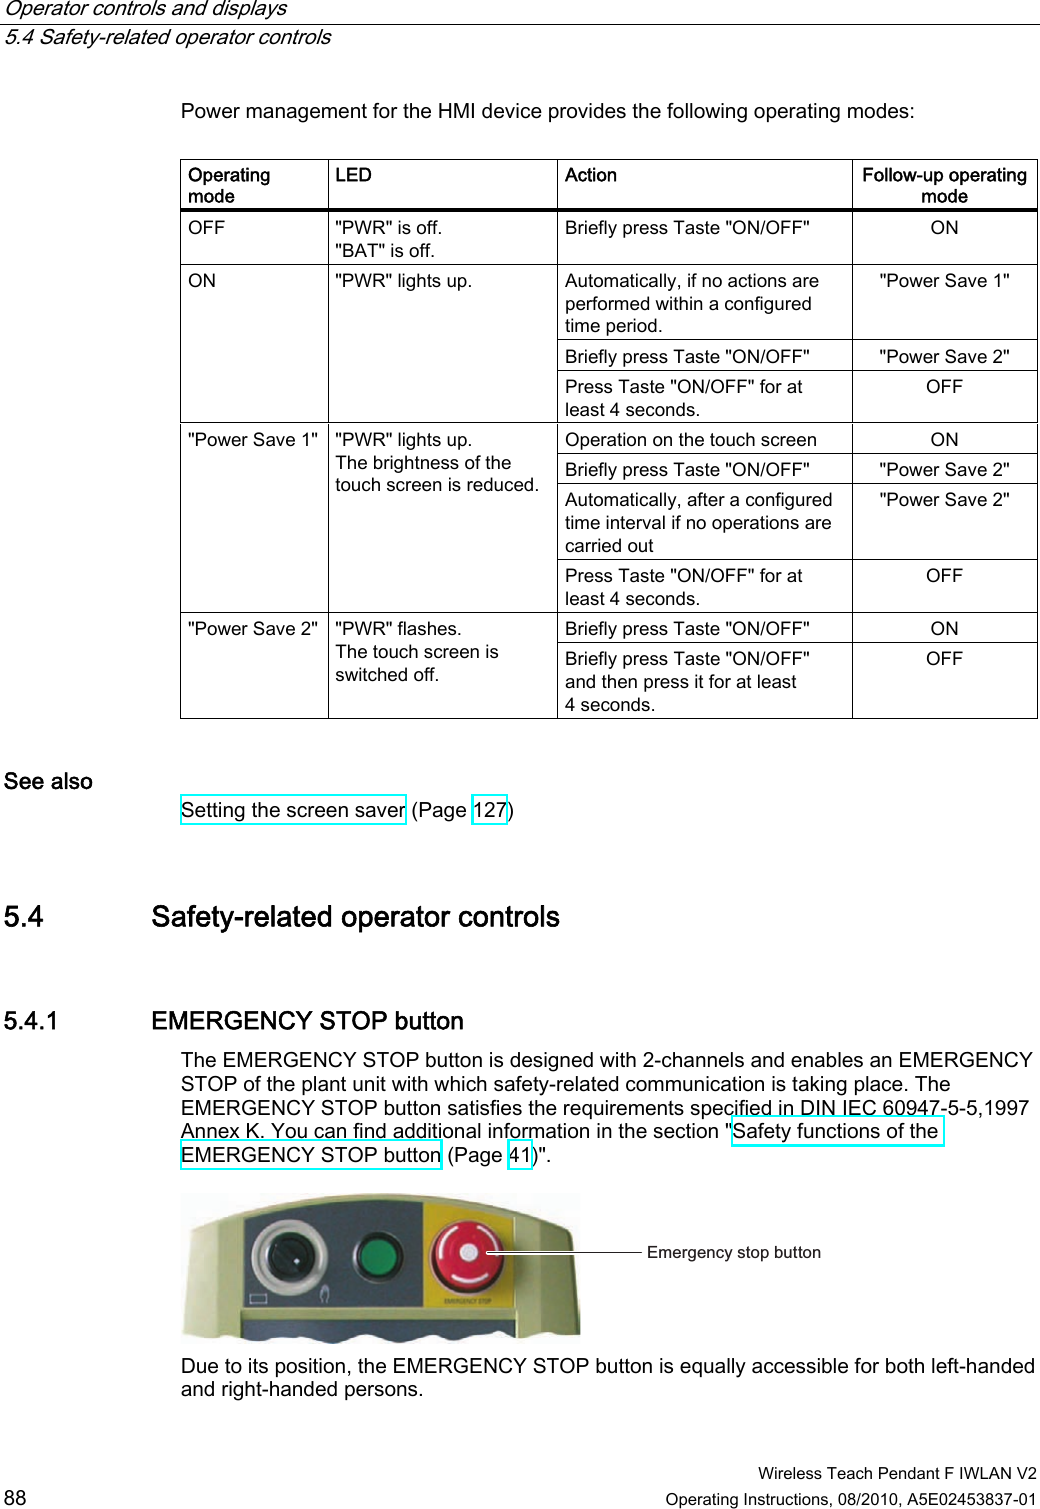 Operator controls and displays   5.4 Safety-related operator controls  Wireless Teach Pendant F IWLAN V2 88 Operating Instructions, 08/2010, A5E02453837-01 Power management for the HMI device provides the following operating modes:  Operating mode LED  Action  Follow-up operating mode OFF  &quot;PWR&quot; is off. &quot;BAT&quot; is off. Briefly press Taste &quot;ON/OFF&quot;  ON Automatically, if no actions are performed within a configured time period. &quot;Power Save 1&quot; Briefly press Taste &quot;ON/OFF&quot;  &quot;Power Save 2&quot; ON  &quot;PWR&quot; lights up. Press Taste &quot;ON/OFF&quot; for at least 4 seconds. OFF Operation on the touch screen  ON Briefly press Taste &quot;ON/OFF&quot;  &quot;Power Save 2&quot; Automatically, after a configured time interval if no operations are carried out &quot;Power Save 2&quot; &quot;Power Save 1&quot;  &quot;PWR&quot; lights up. The brightness of the touch screen is reduced. Press Taste &quot;ON/OFF&quot; for at least 4 seconds. OFF Briefly press Taste &quot;ON/OFF&quot;  ON &quot;Power Save 2&quot;  &quot;PWR&quot; flashes. The touch screen is switched off.  Briefly press Taste &quot;ON/OFF&quot; and then press it for at least 4 seconds. OFF See also Setting the screen saver (Page 127) 5.4 Safety-related operator controls 5.4.1 EMERGENCY STOP button The EMERGENCY STOP button is designed with 2-channels and enables an EMERGENCY STOP of the plant unit with which safety-related communication is taking place. The EMERGENCY STOP button satisfies the requirements specified in DIN IEC 60947-5-5,1997 Annex K. You can find additional information in the section &quot;Safety functions of the EMERGENCY STOP button (Page 41)&quot;. (PHUJHQF\VWRSEXWWRQ Due to its position, the EMERGENCY STOP button is equally accessible for both left-handed and right-handed persons. PRELIMINARY II 1.7.2010